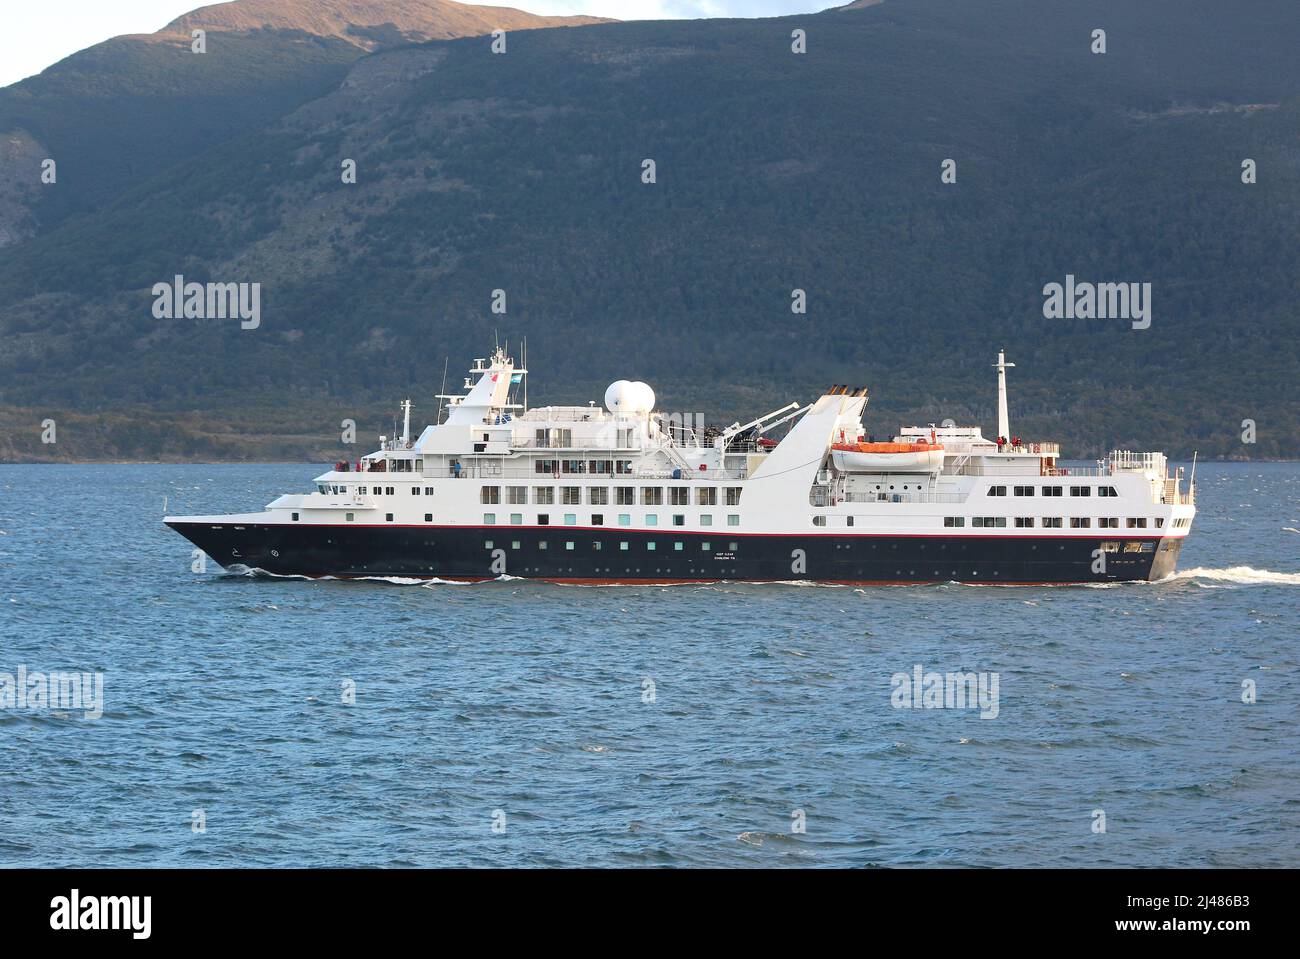 The new expedition cruise line Exploris bought the Silver Explorer. (Silversea). The cruise ship will start sailing for Exploris in December 2023. Stock Photo